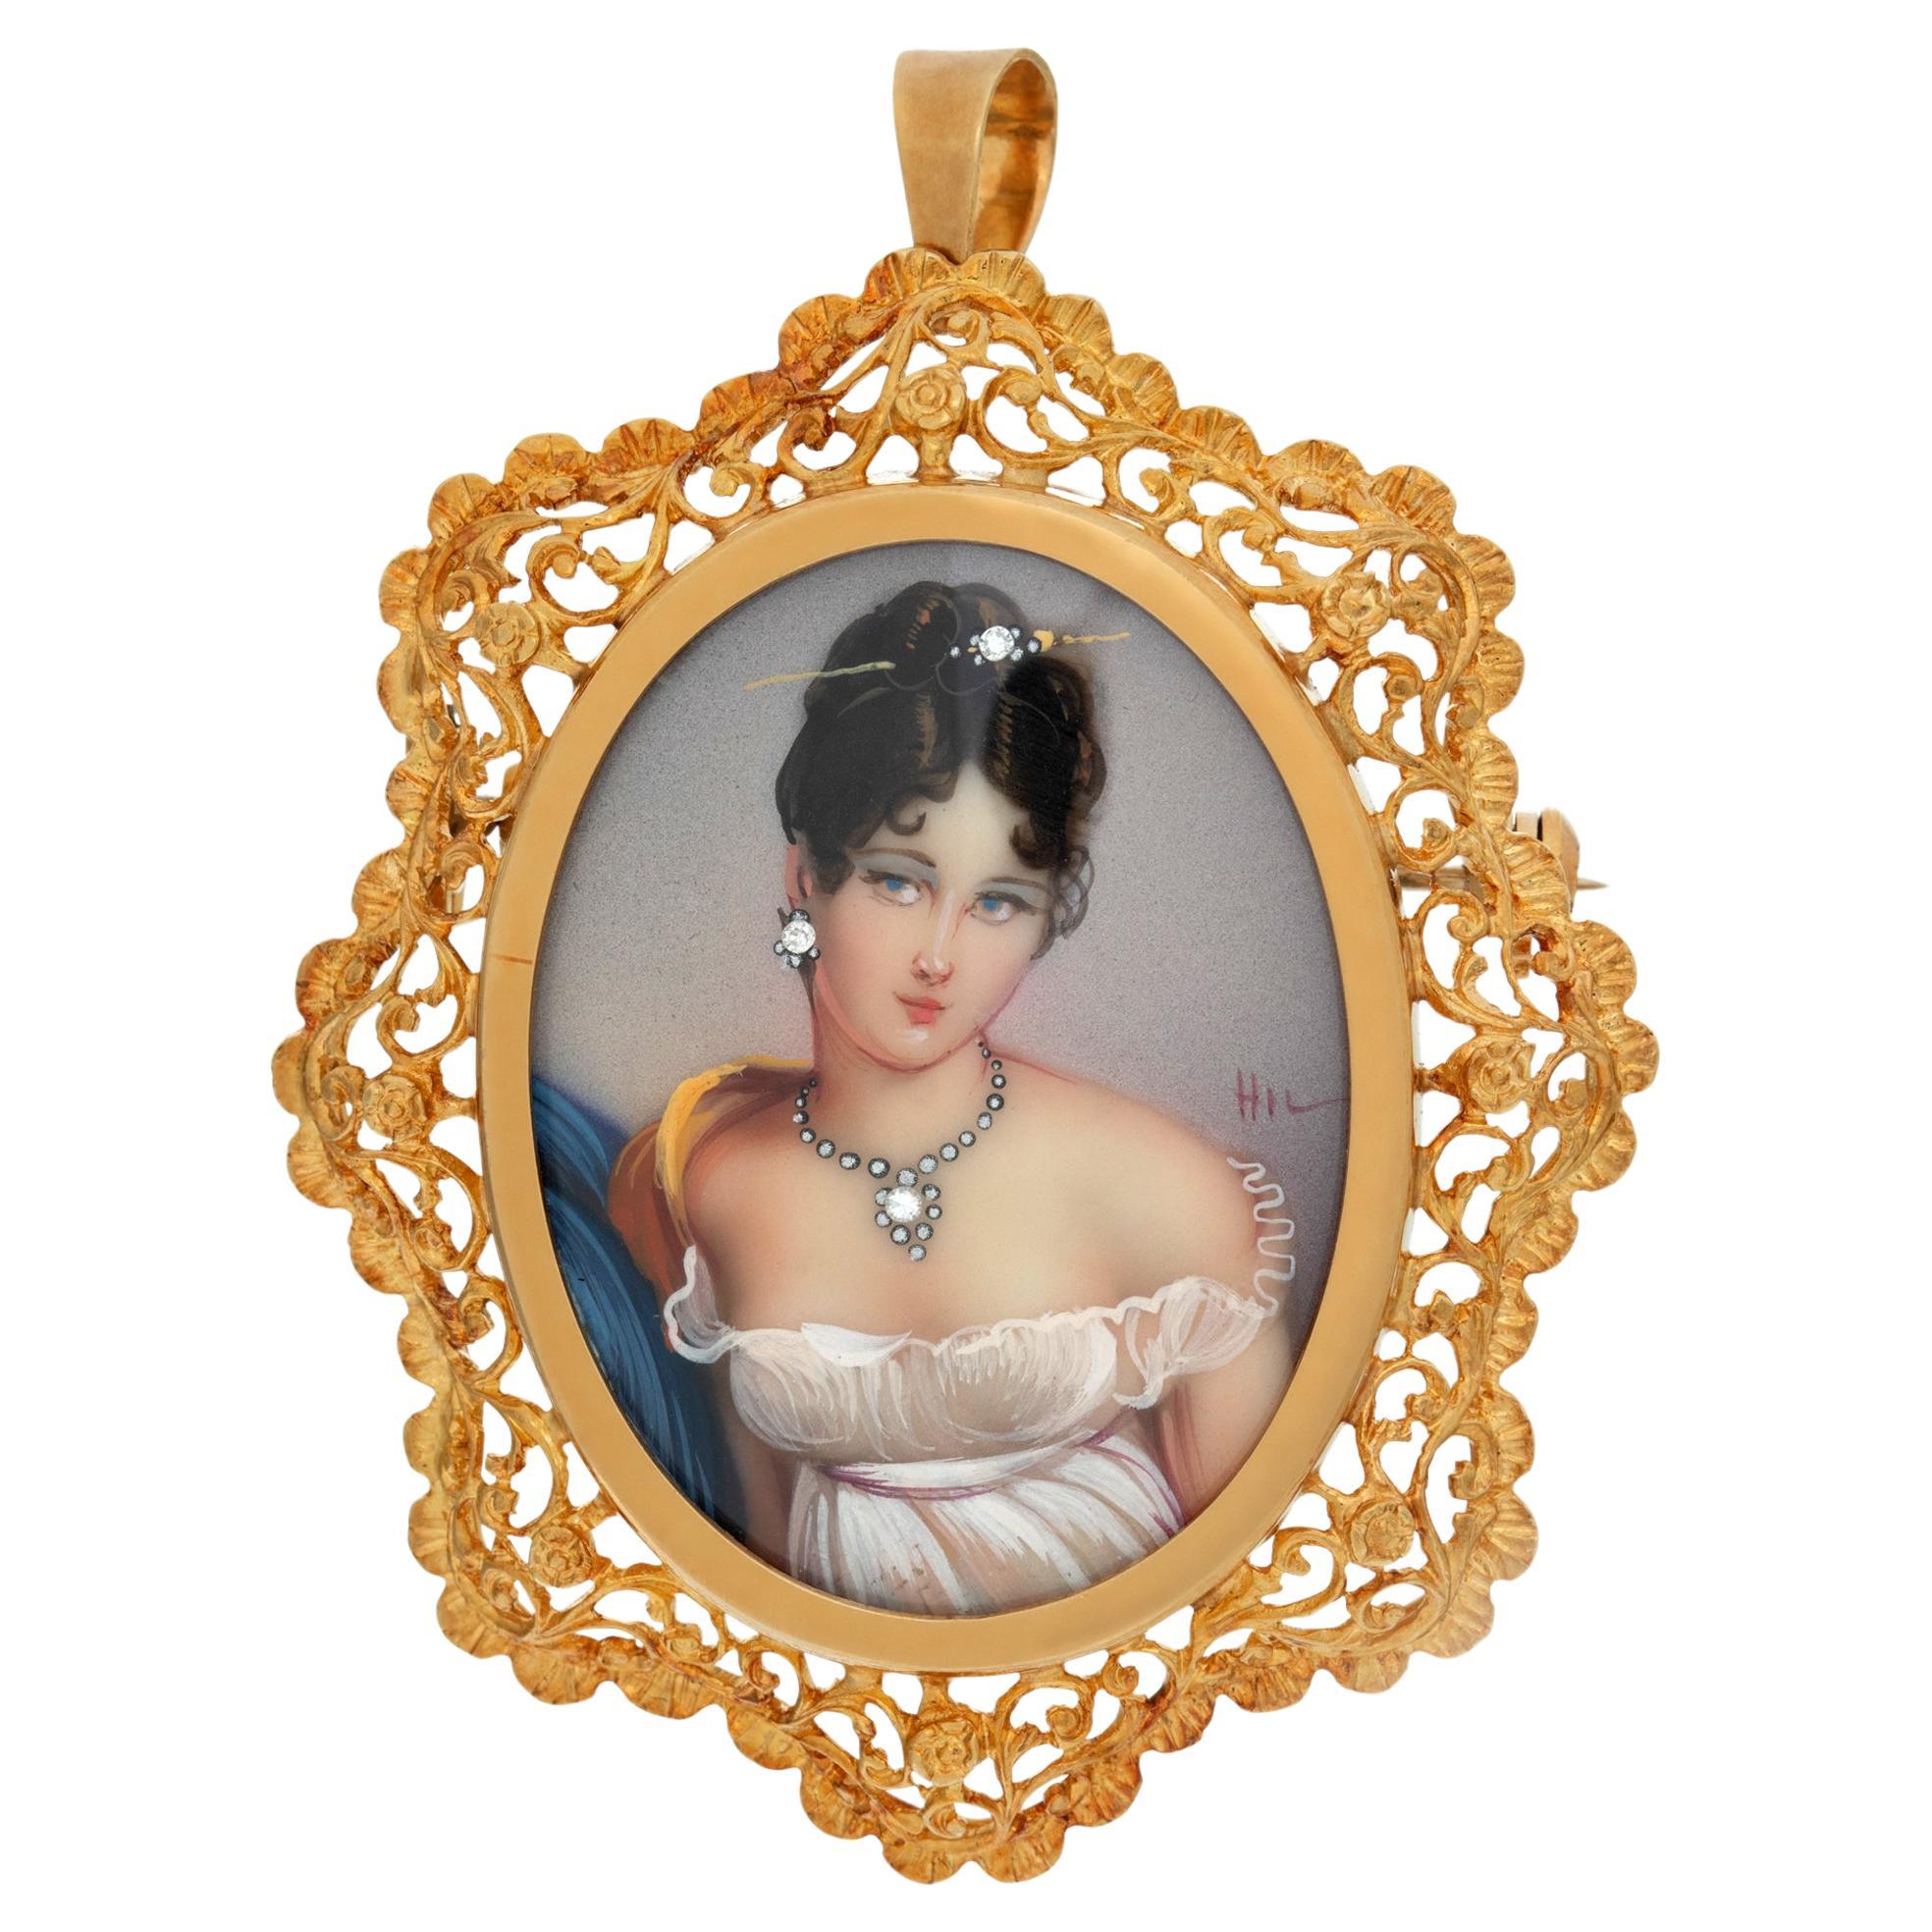 Painted portrait pendant/brooch with yellow gold frame